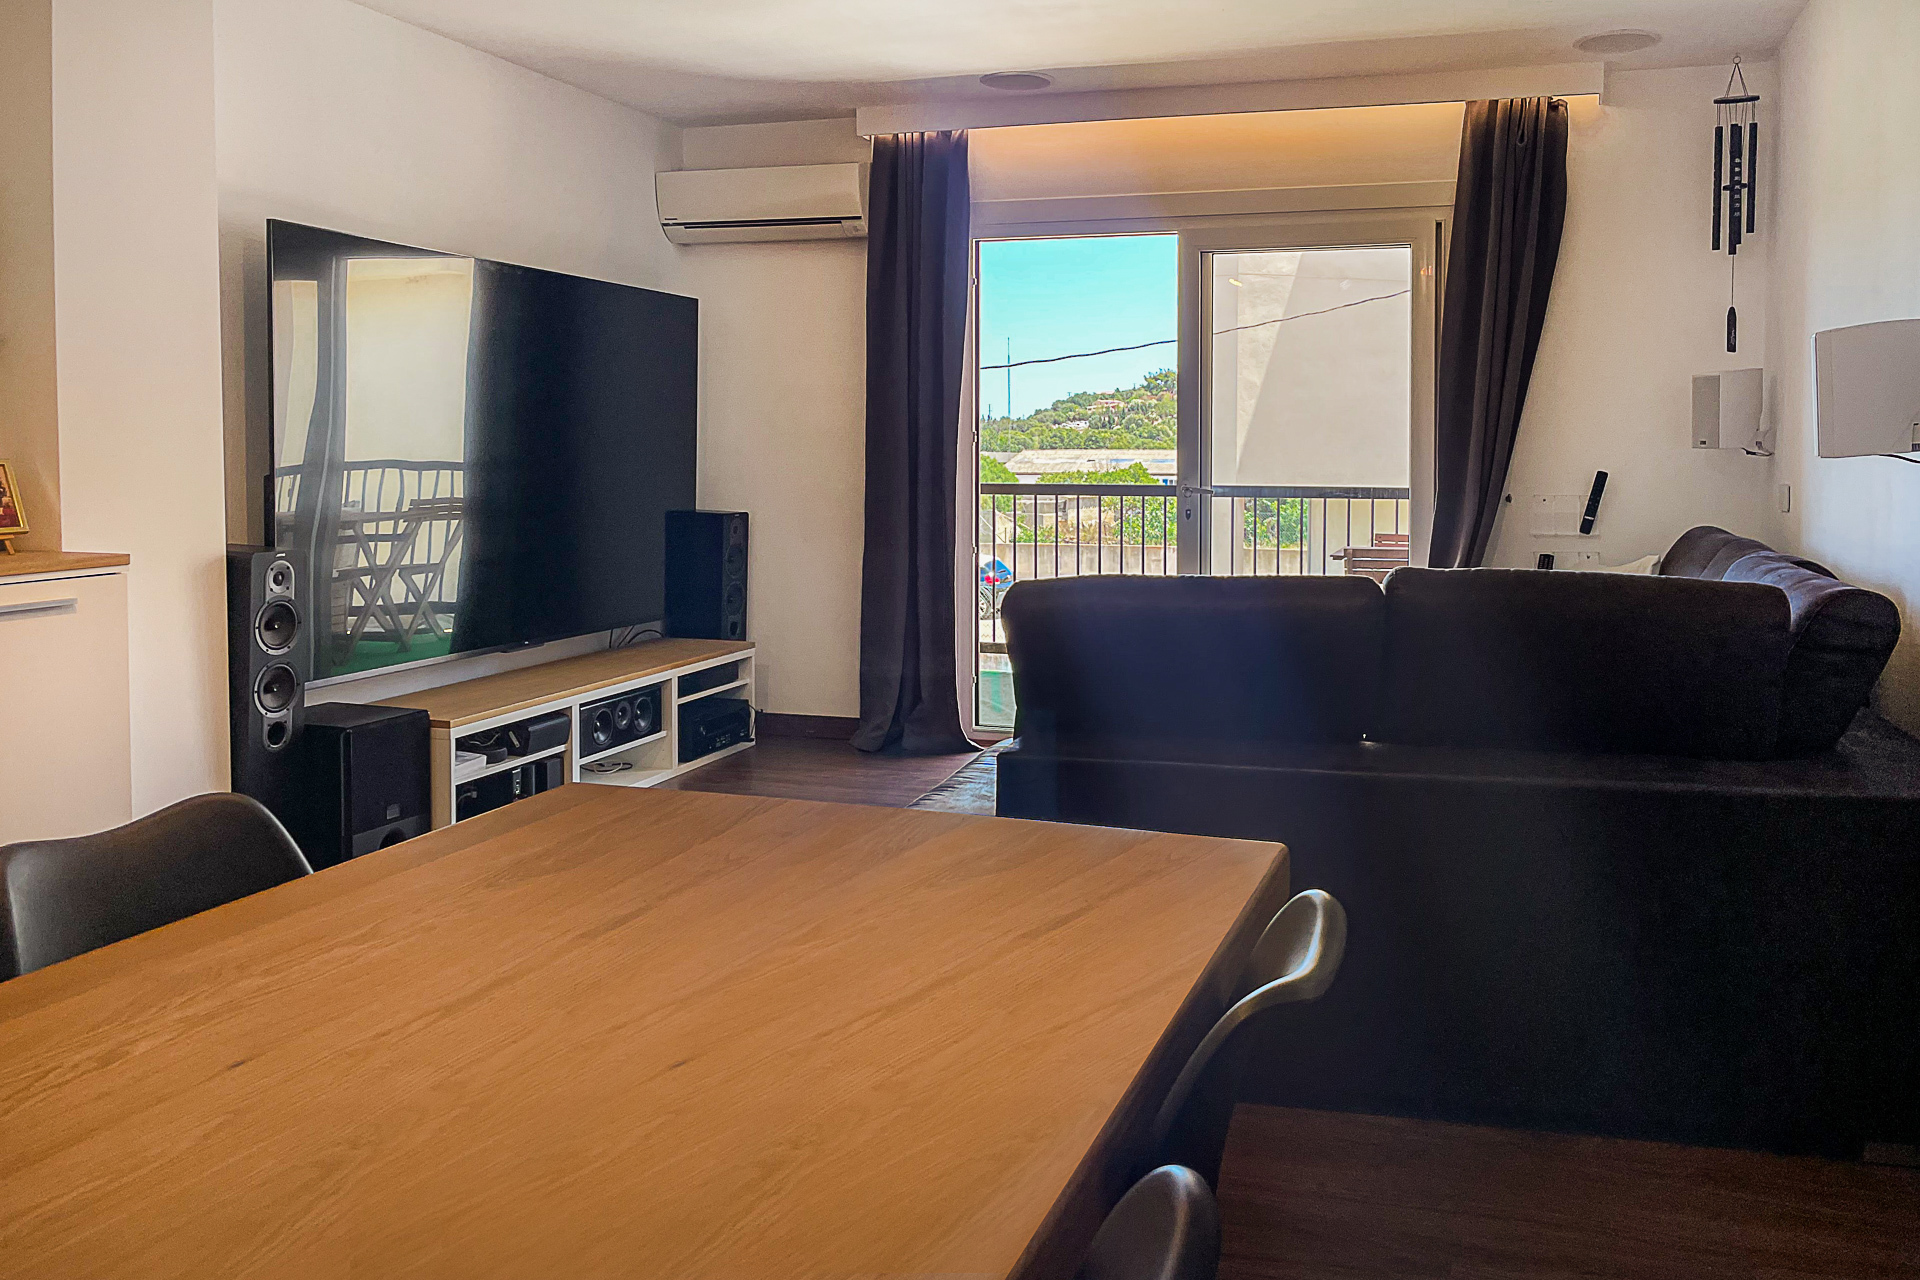 Charming apartment with smart home + surround sound system, modernized bathrooms and balcony, 07580 Capdepera (Spain), Apartment